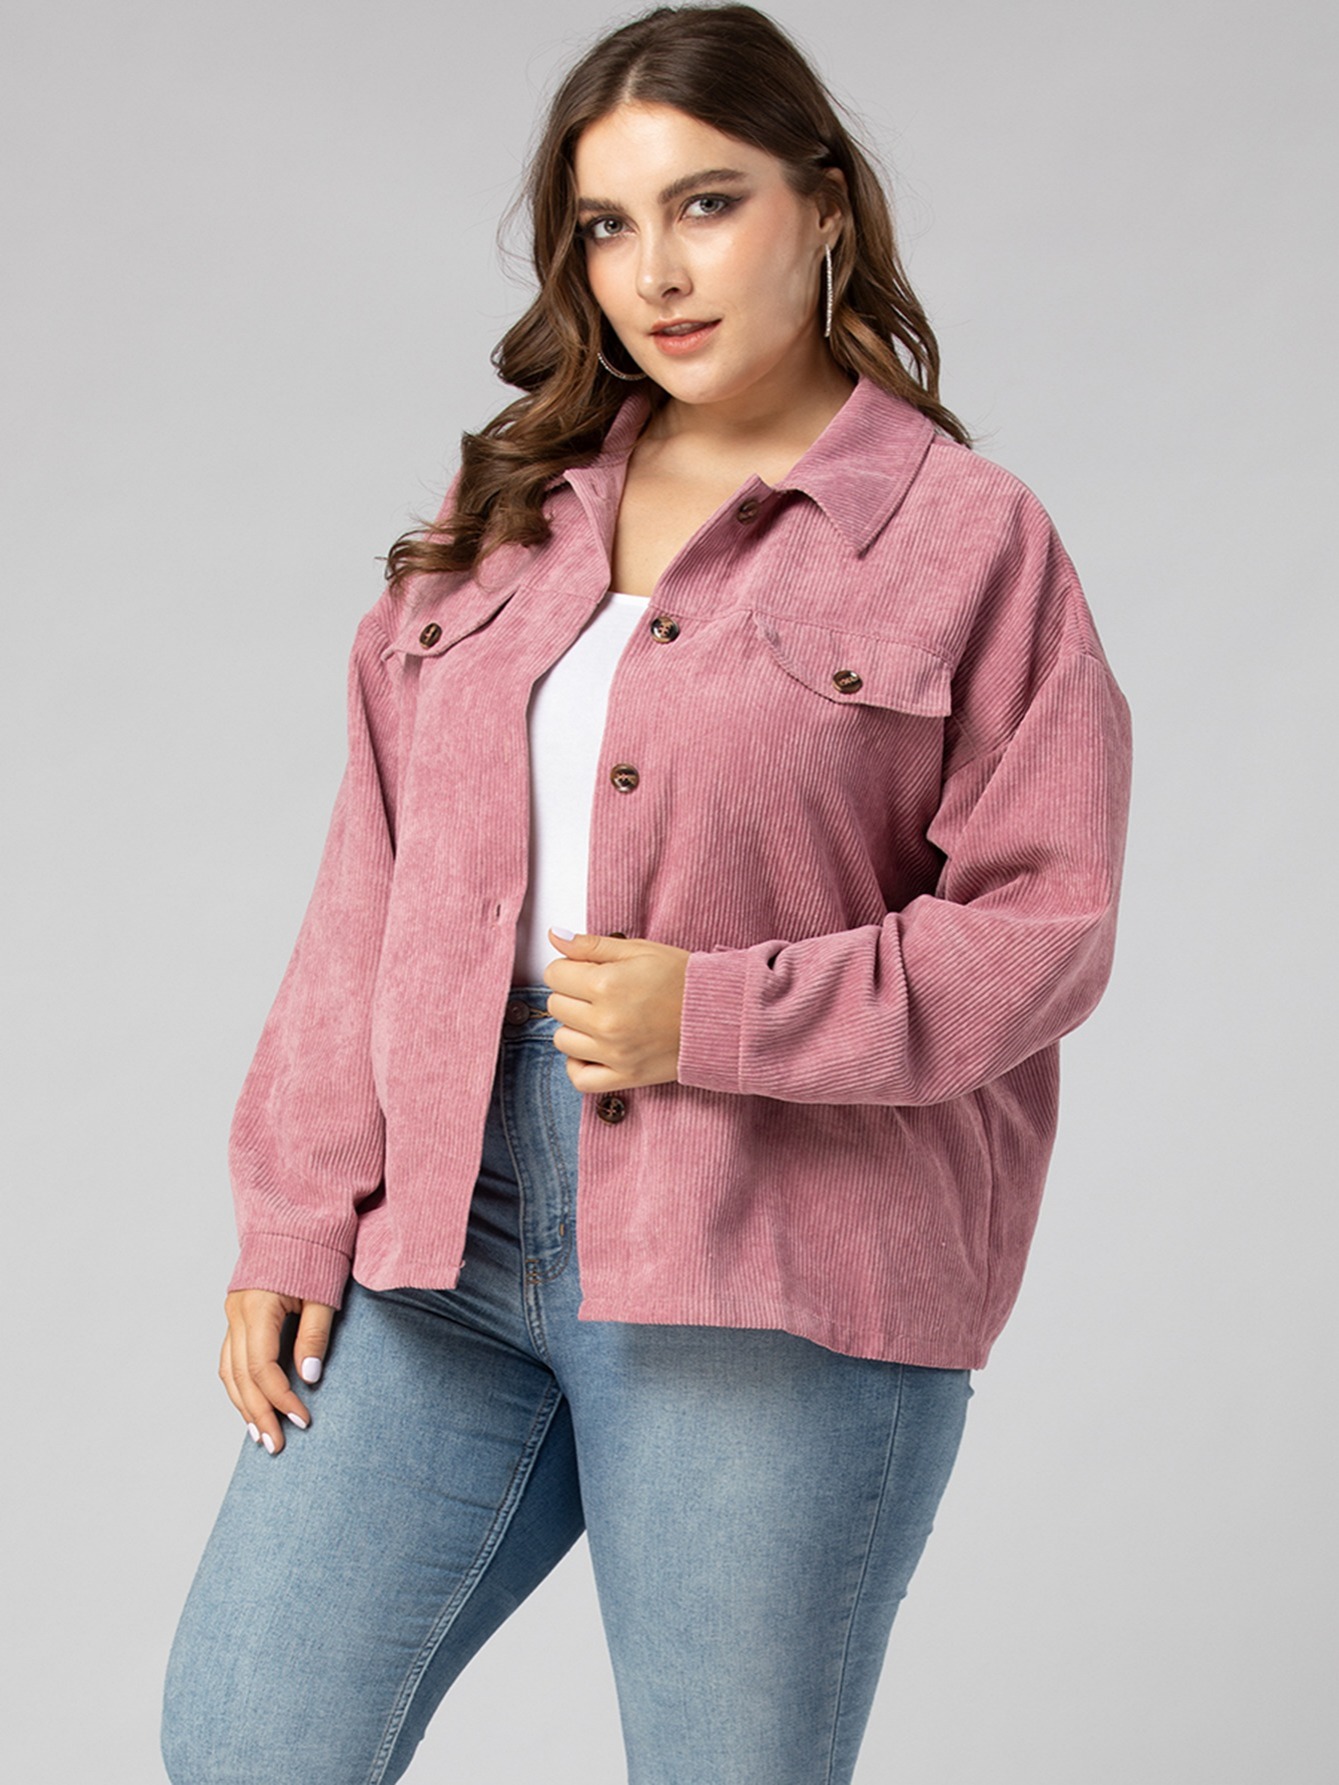 down Womens Coat plus Size Women'S Solid Color Long Sleeve